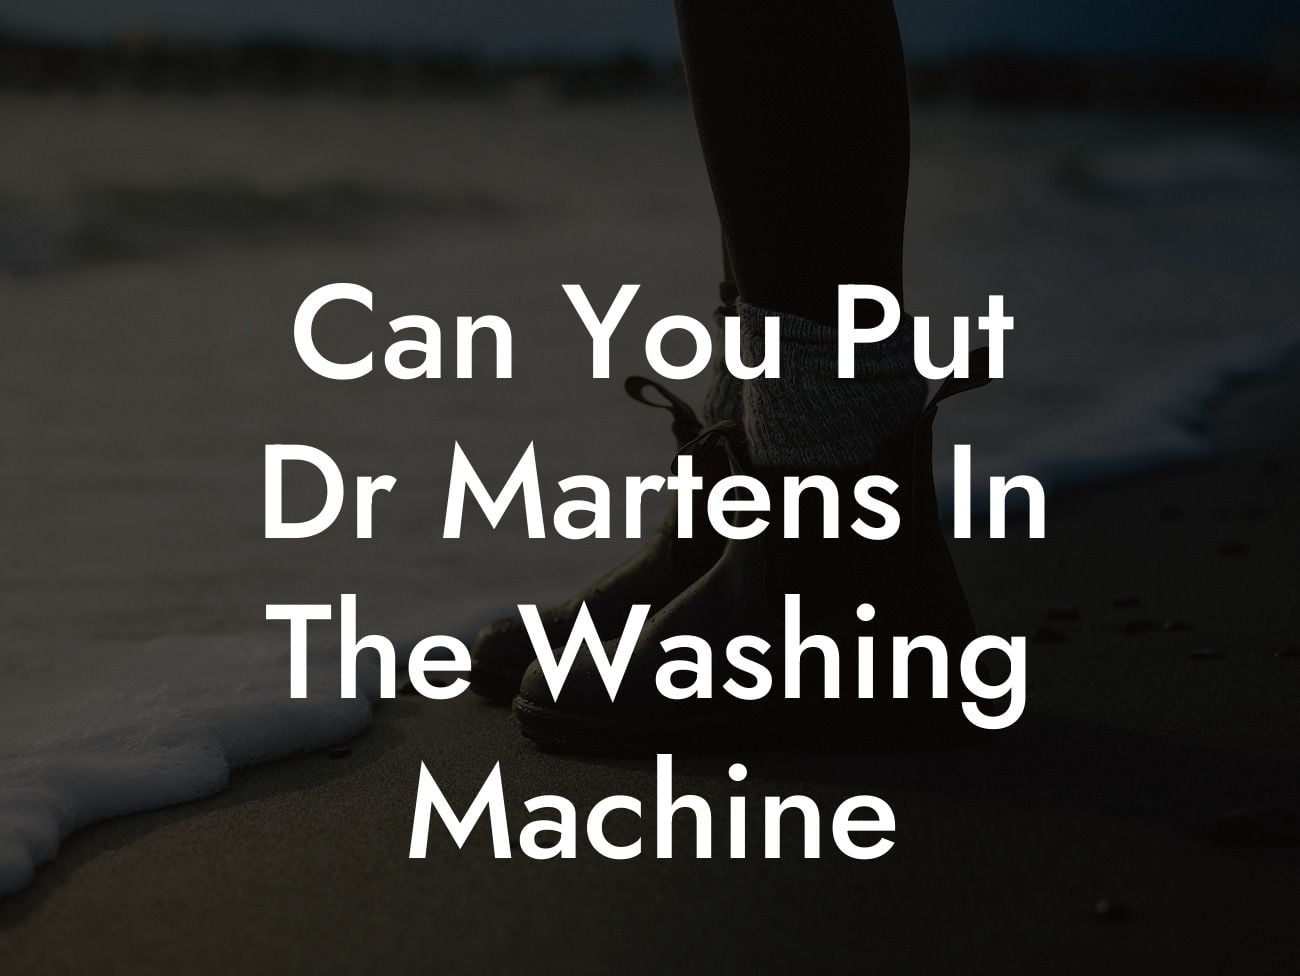 Can You Put Dr Martens In The Washing Machine